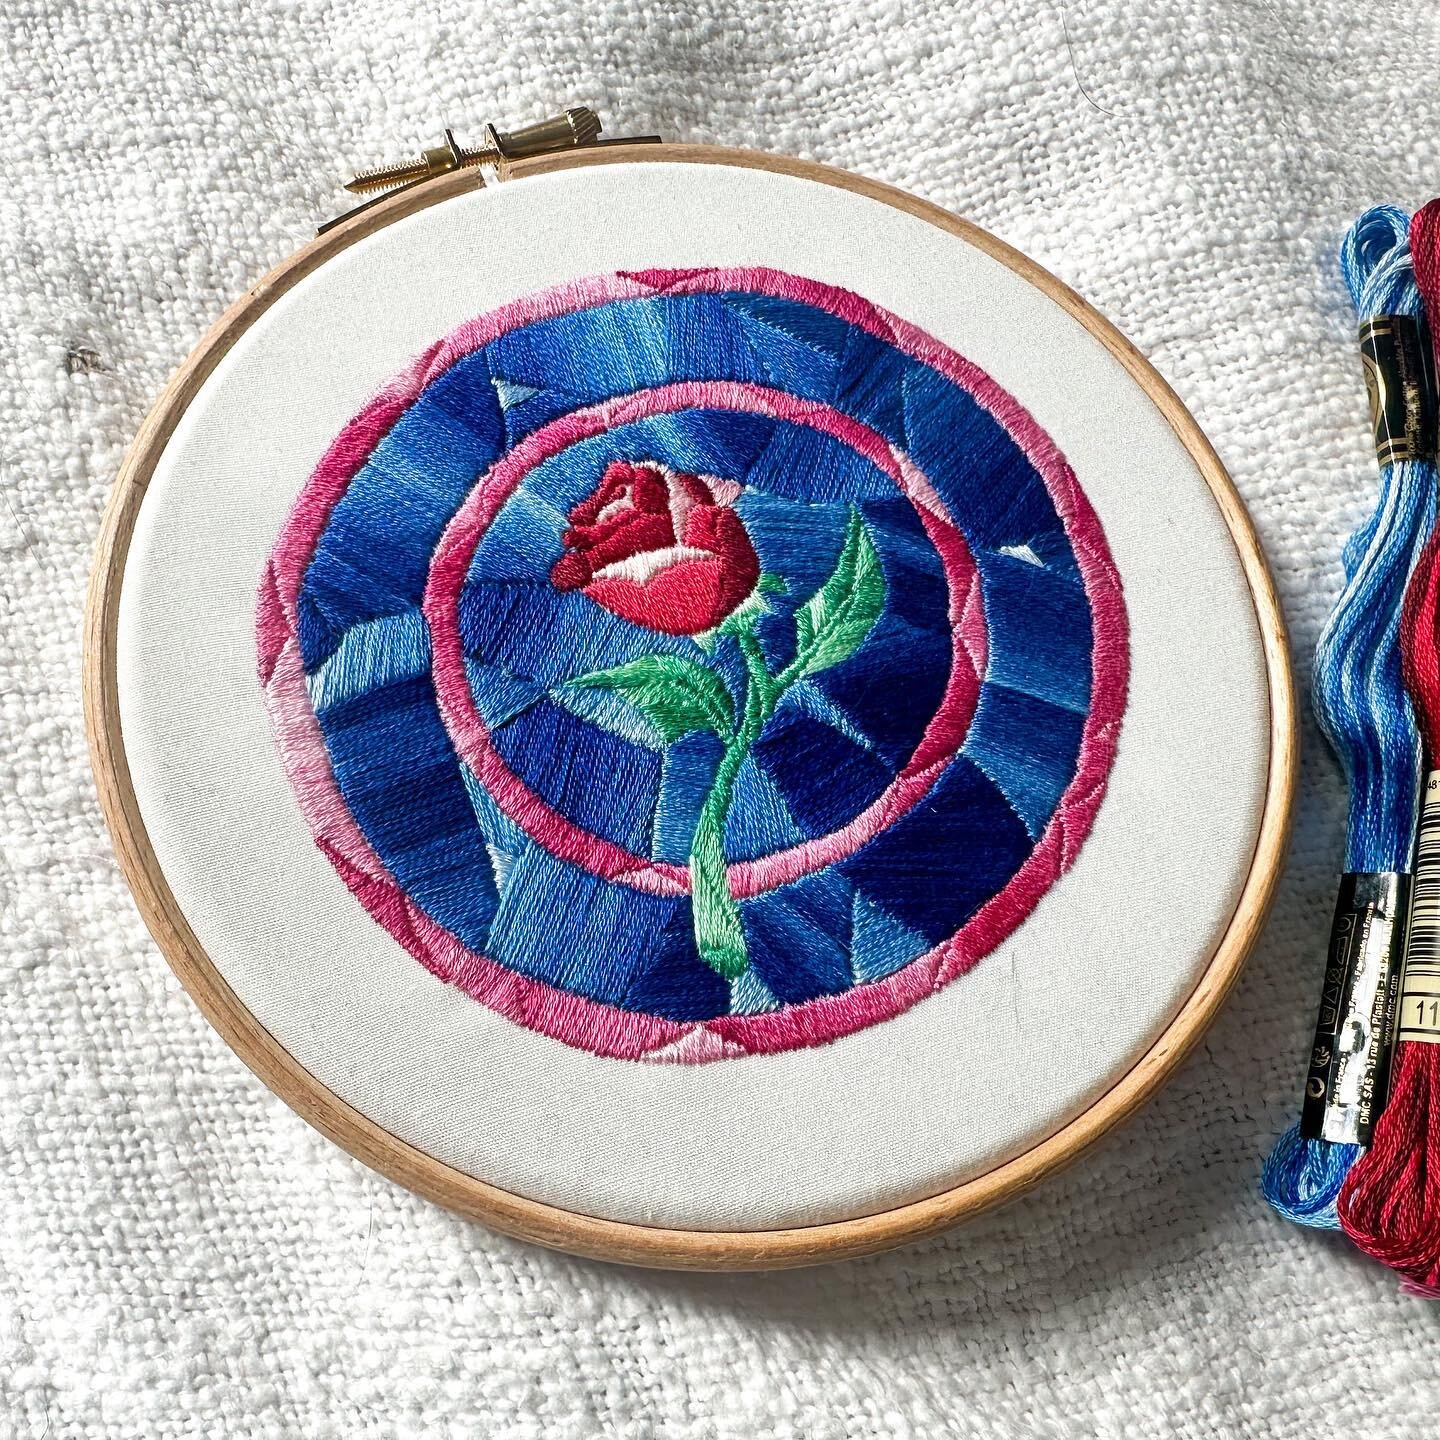 For who could ever learn to love a beast?
🥀
I am SO PROUD of this finished hoop for my March Patreon supporters! Holy cow, it was a labor of love. Only using satin stitch so it has that lovely look, but it took far longer to embroider than I had exp